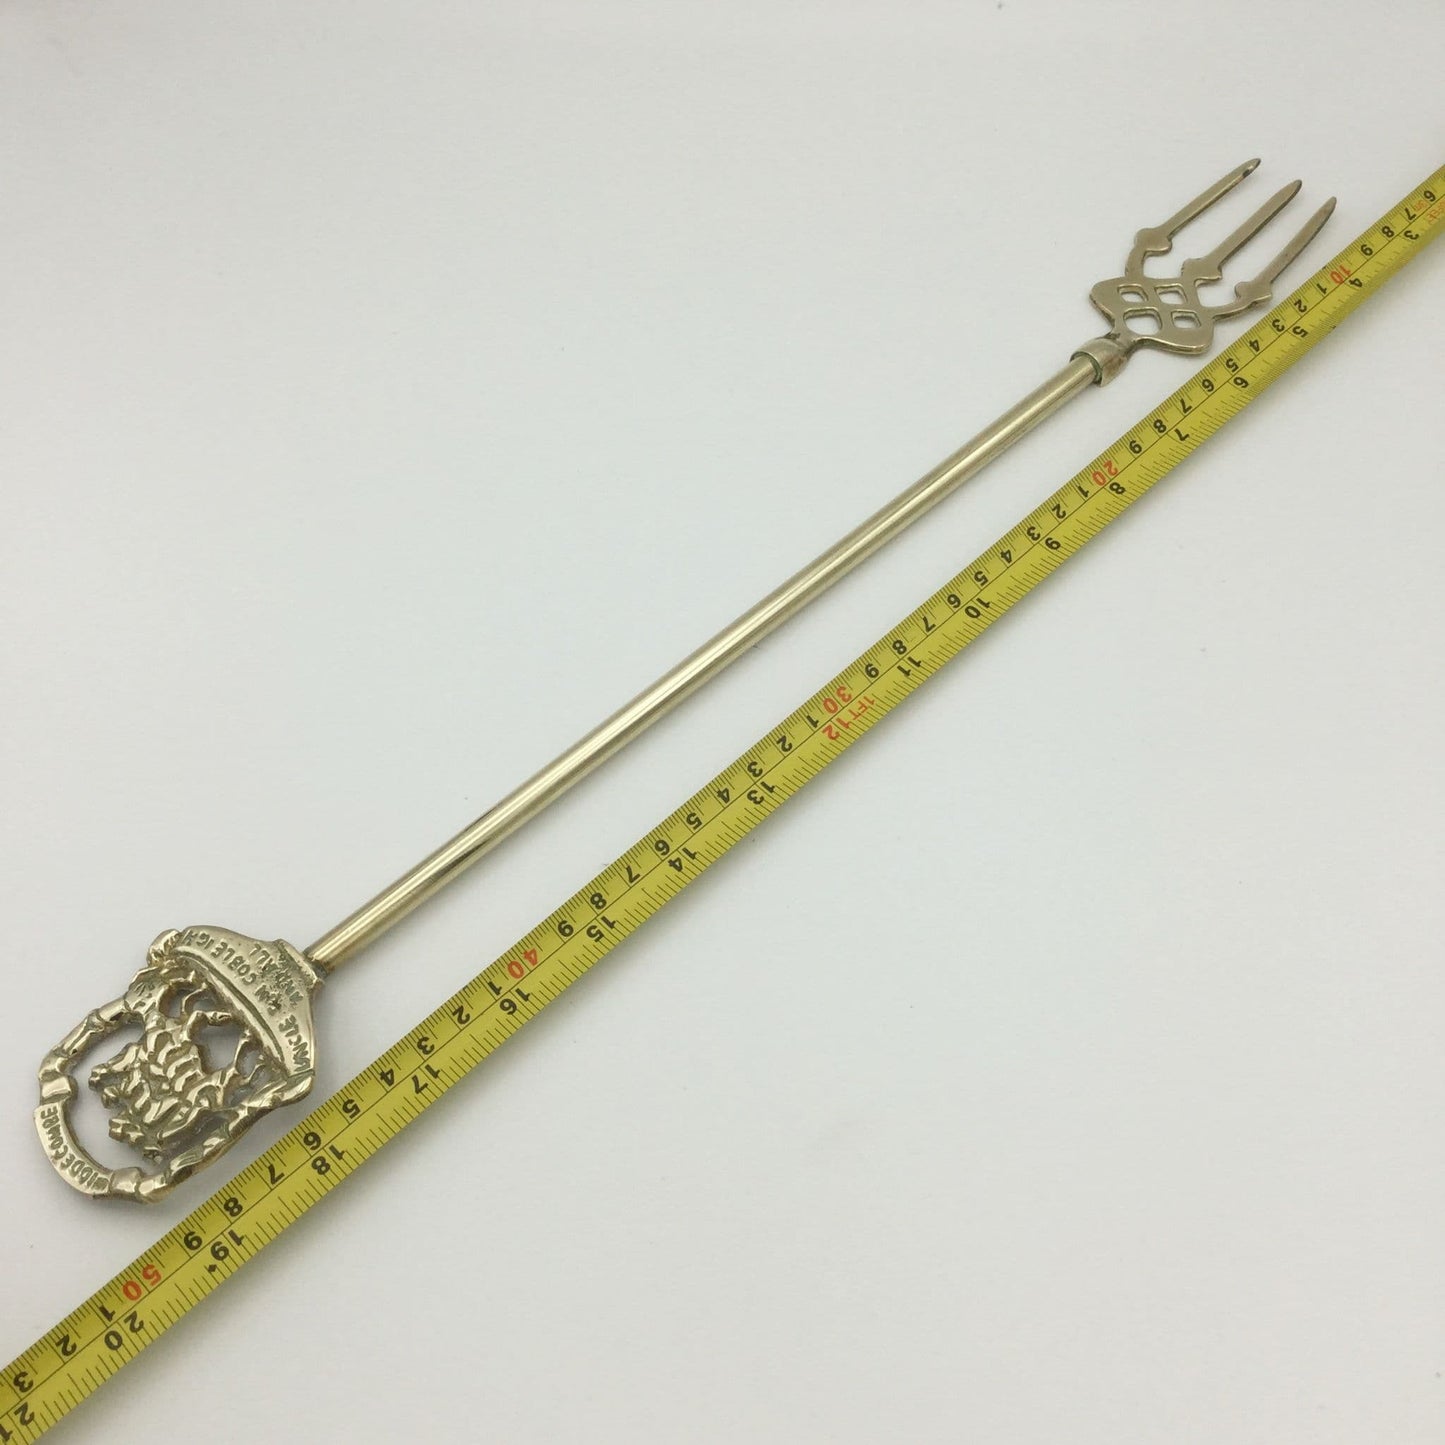 Vintage Uncle Tom Cobleigh Brass Toasting Fork, Widdecombe Fair